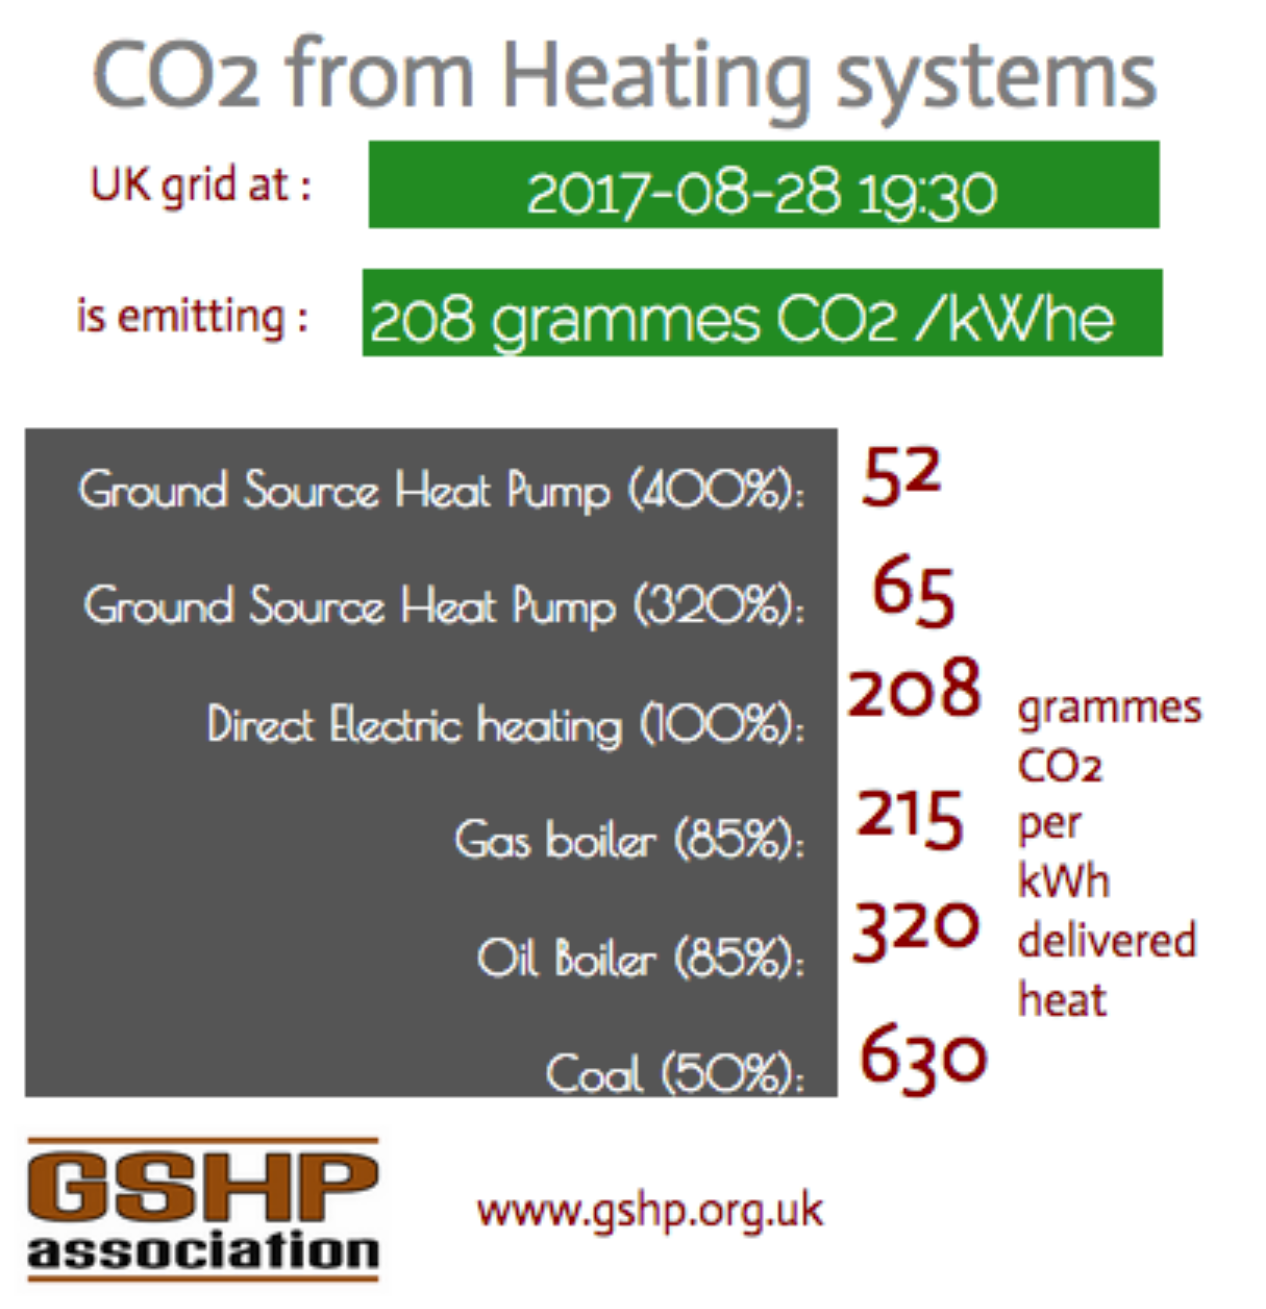 CO2 from heating systems comparison board